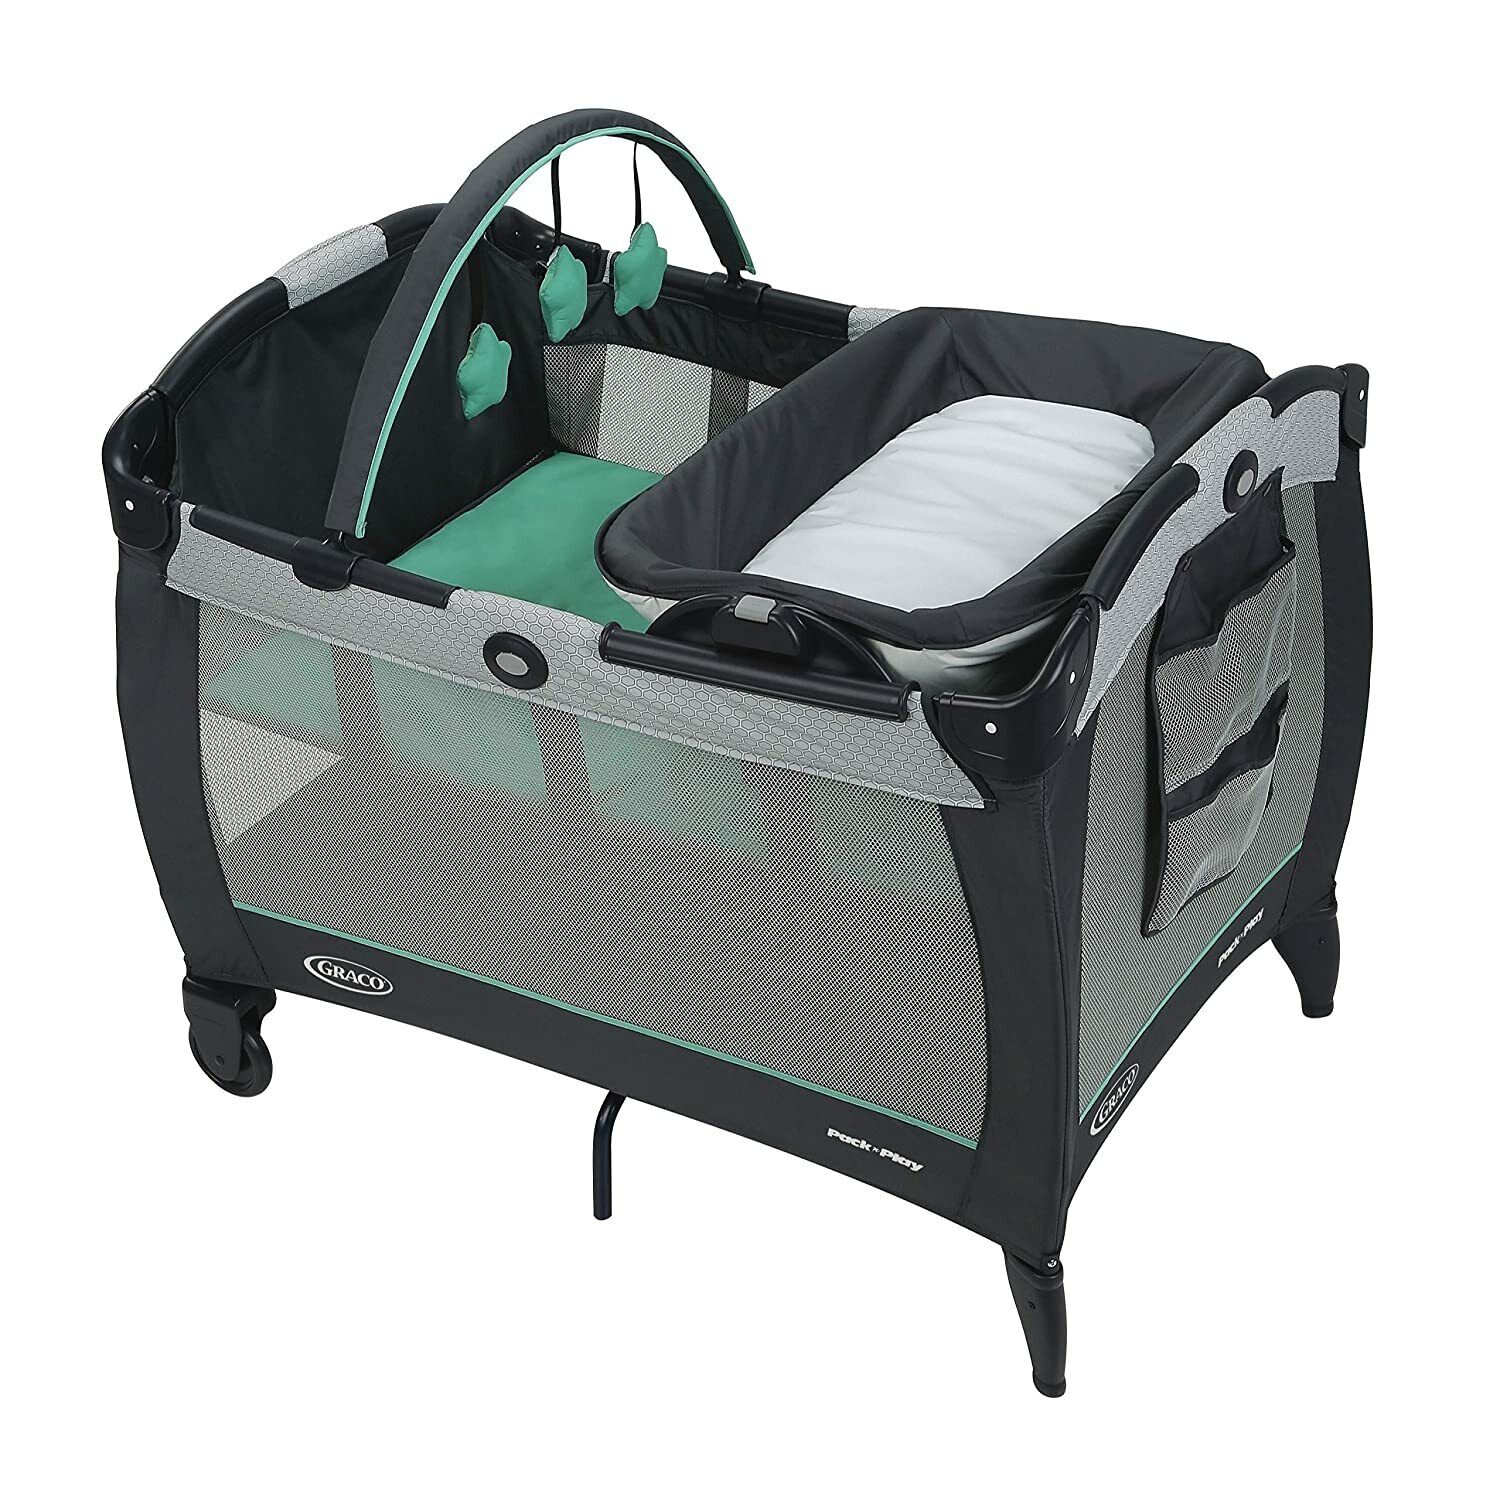 Graco Pack 'n Milwaukee Mall It is very popular Play Playard with Ba Seat Changer LX Reversible